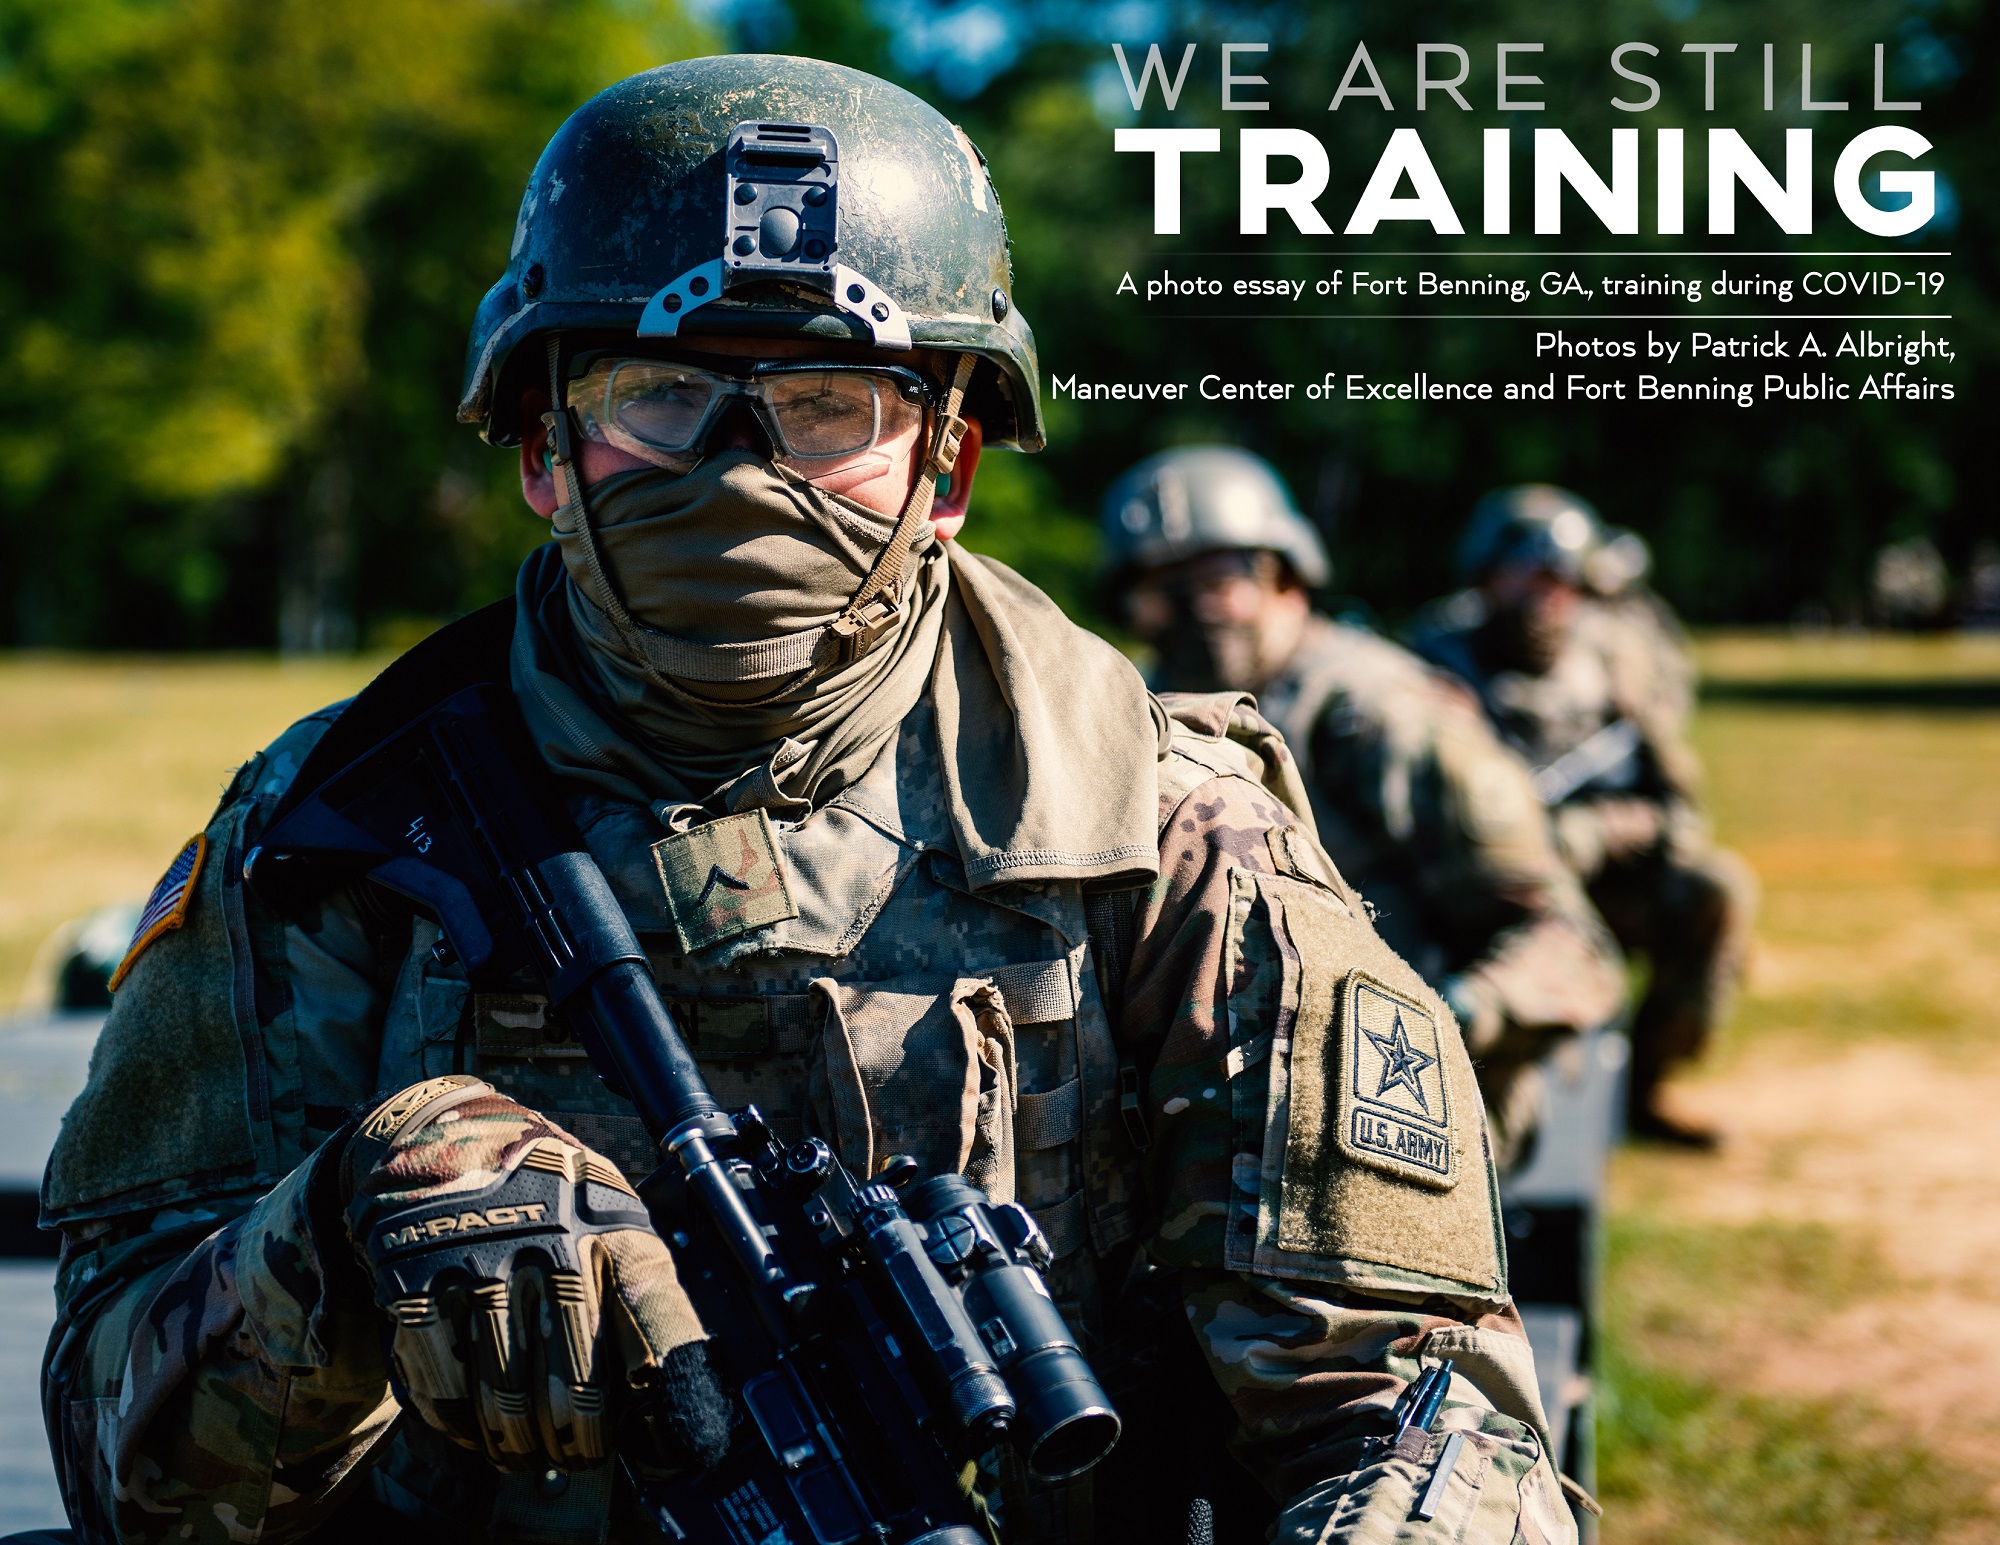 The United States Army, Fort Benning, Photo Essay